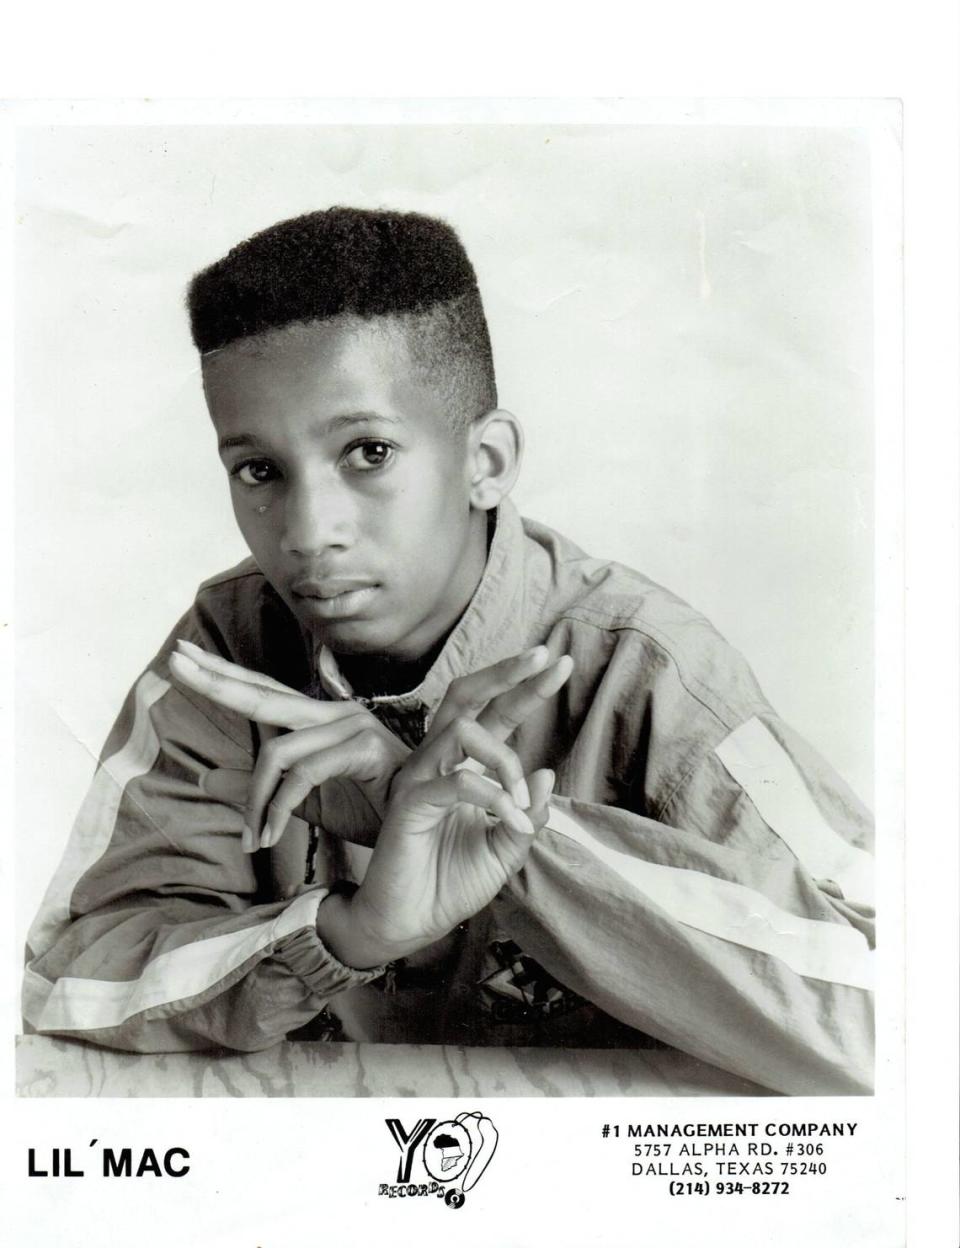 New Orleans rapper Mac, who then went by Lil Mac, in an undated photo from his childhood. Mac began his music career when he was 11 years old.